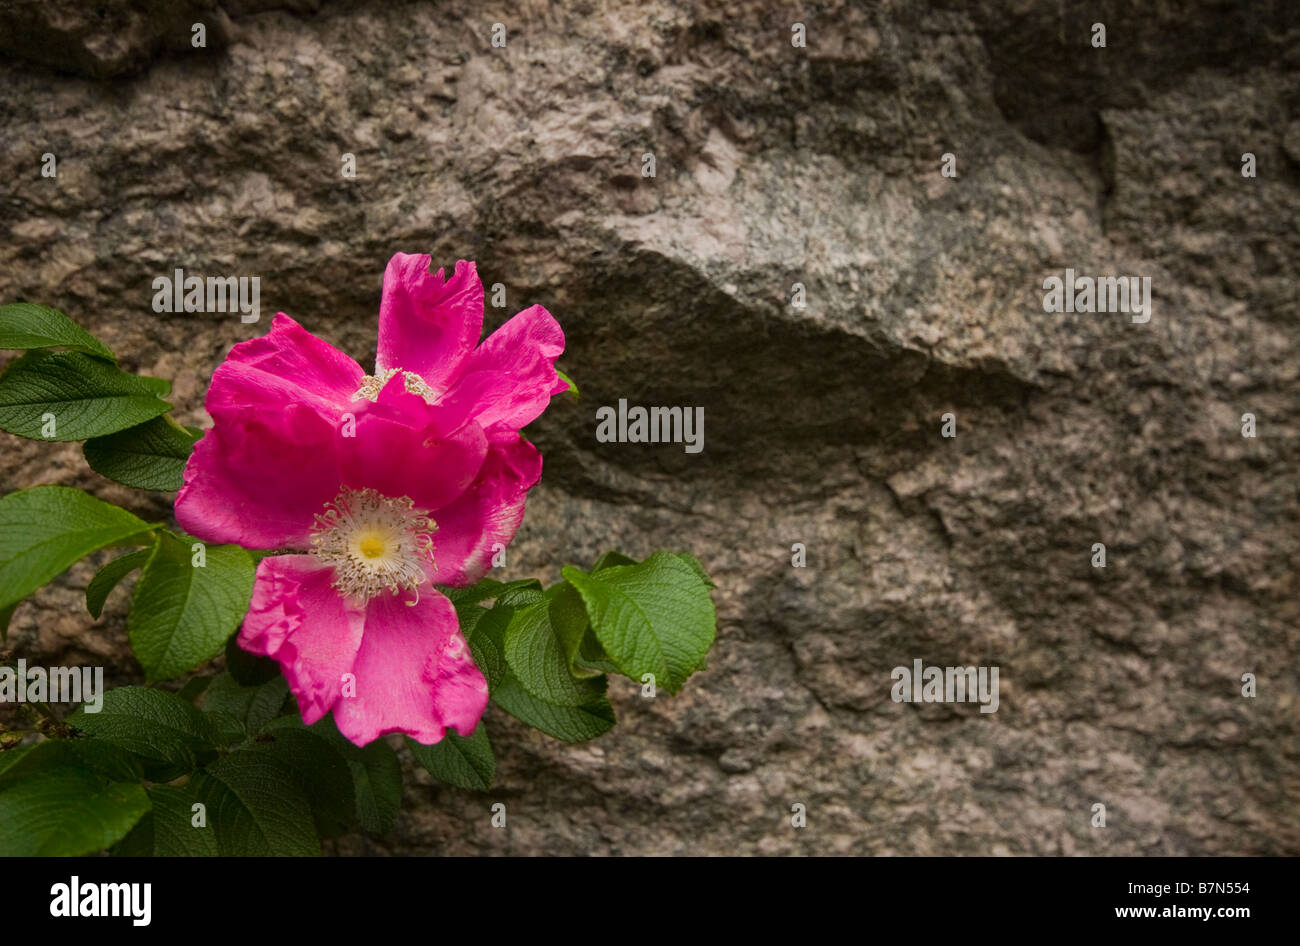 Roses in front of a rock formation Stock Photo